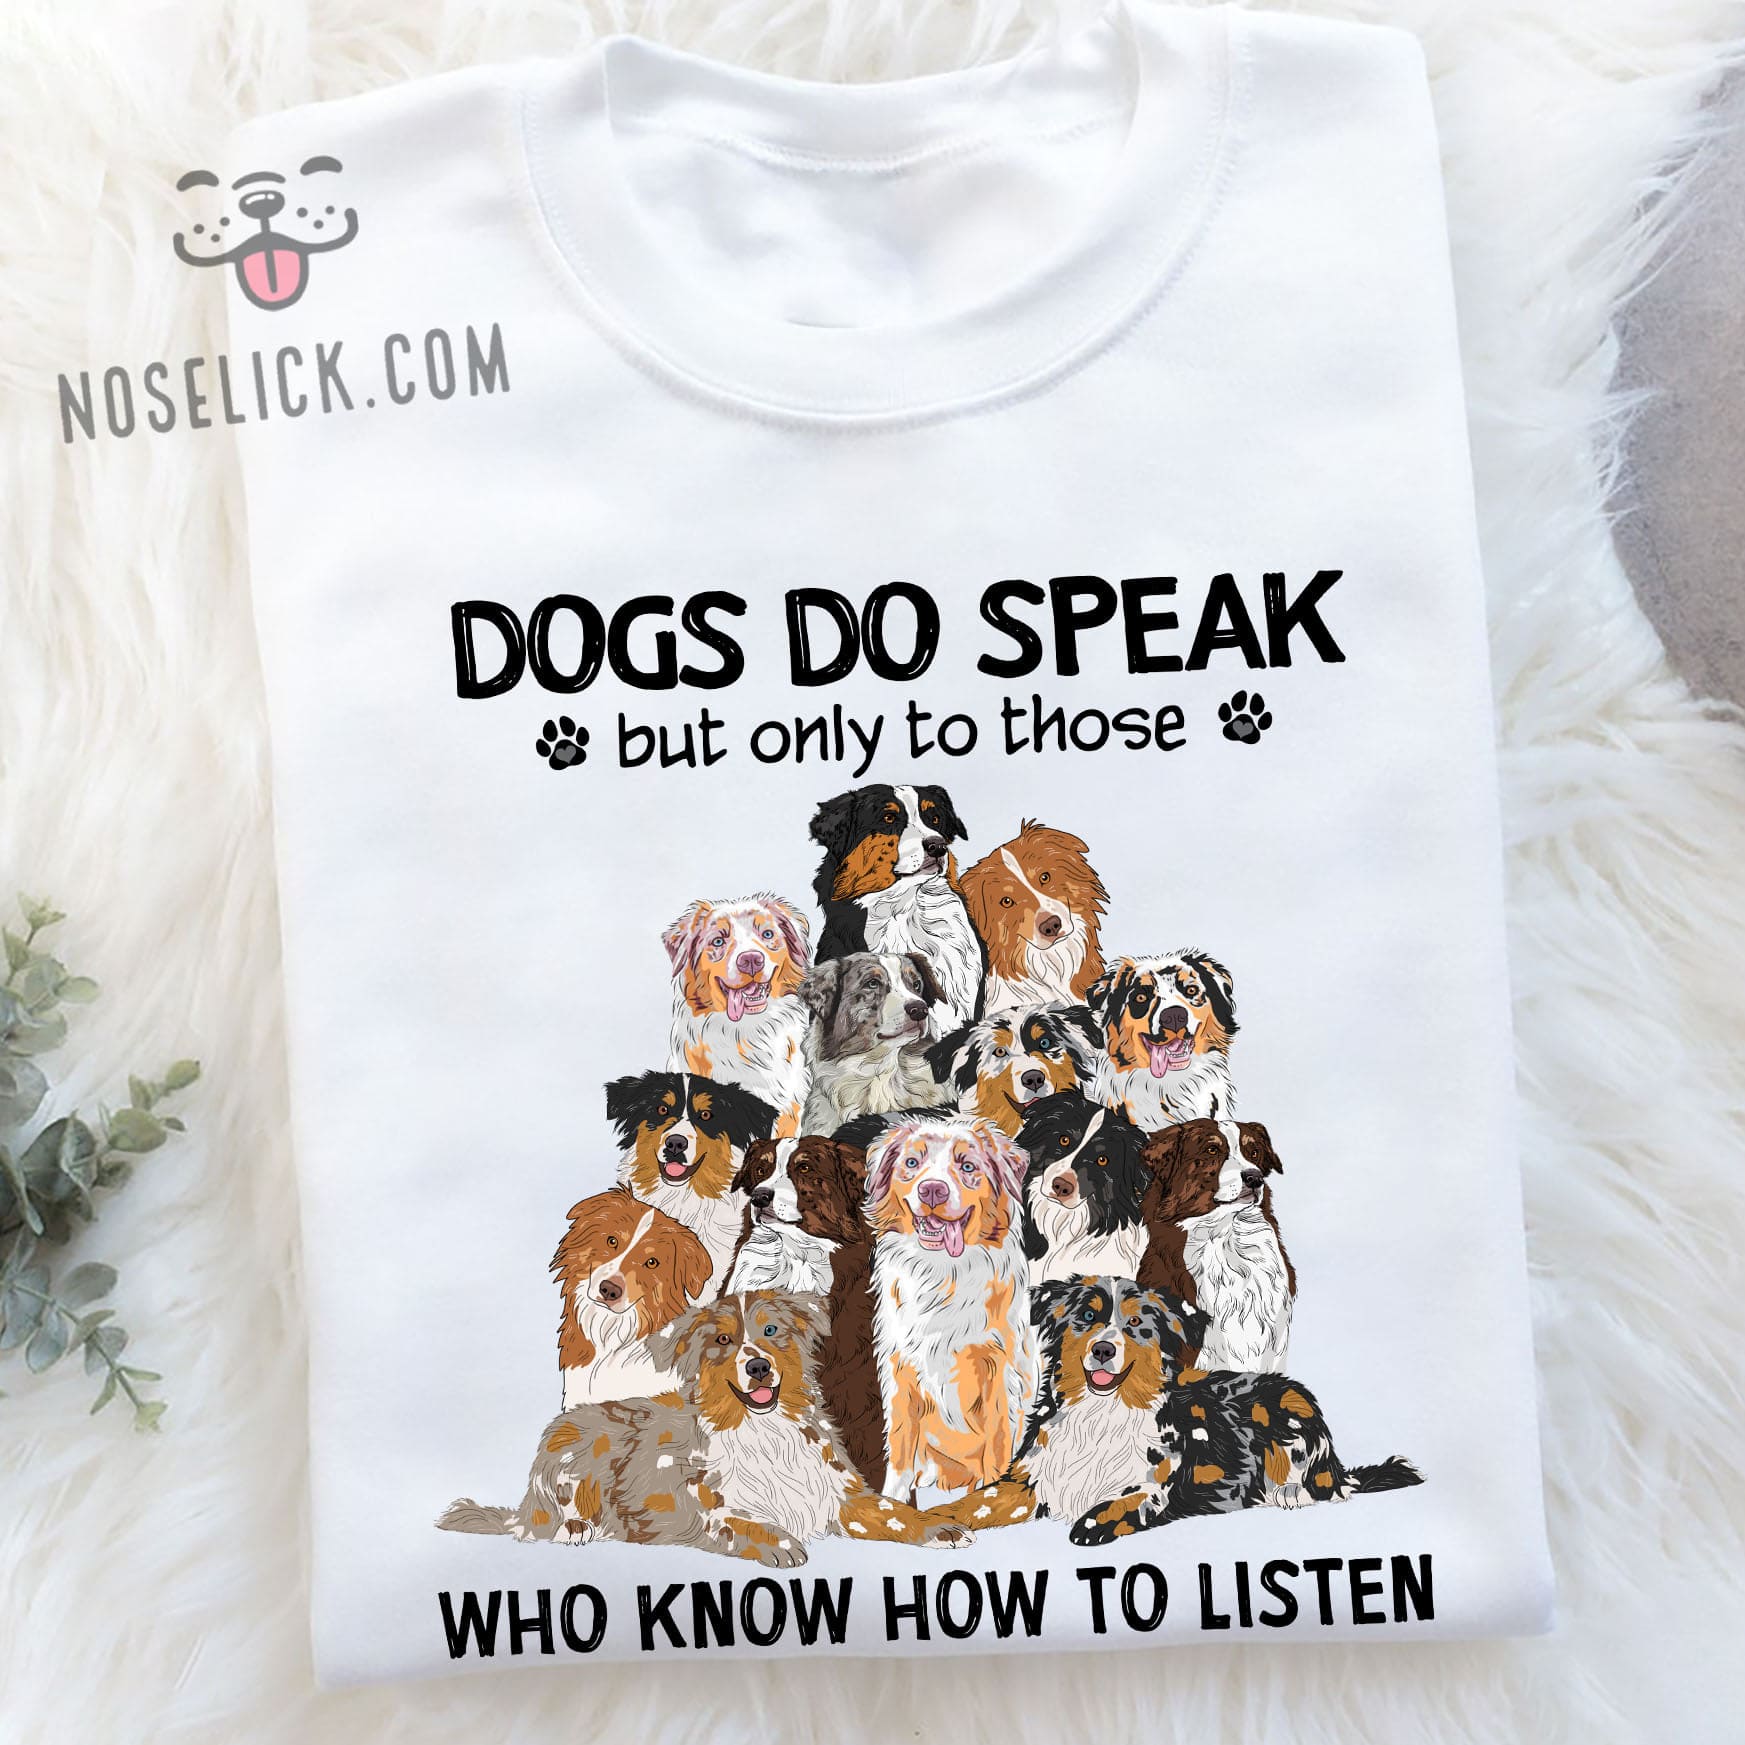 Australian Shepherd - Dogs do speak but only to those who know how to listen